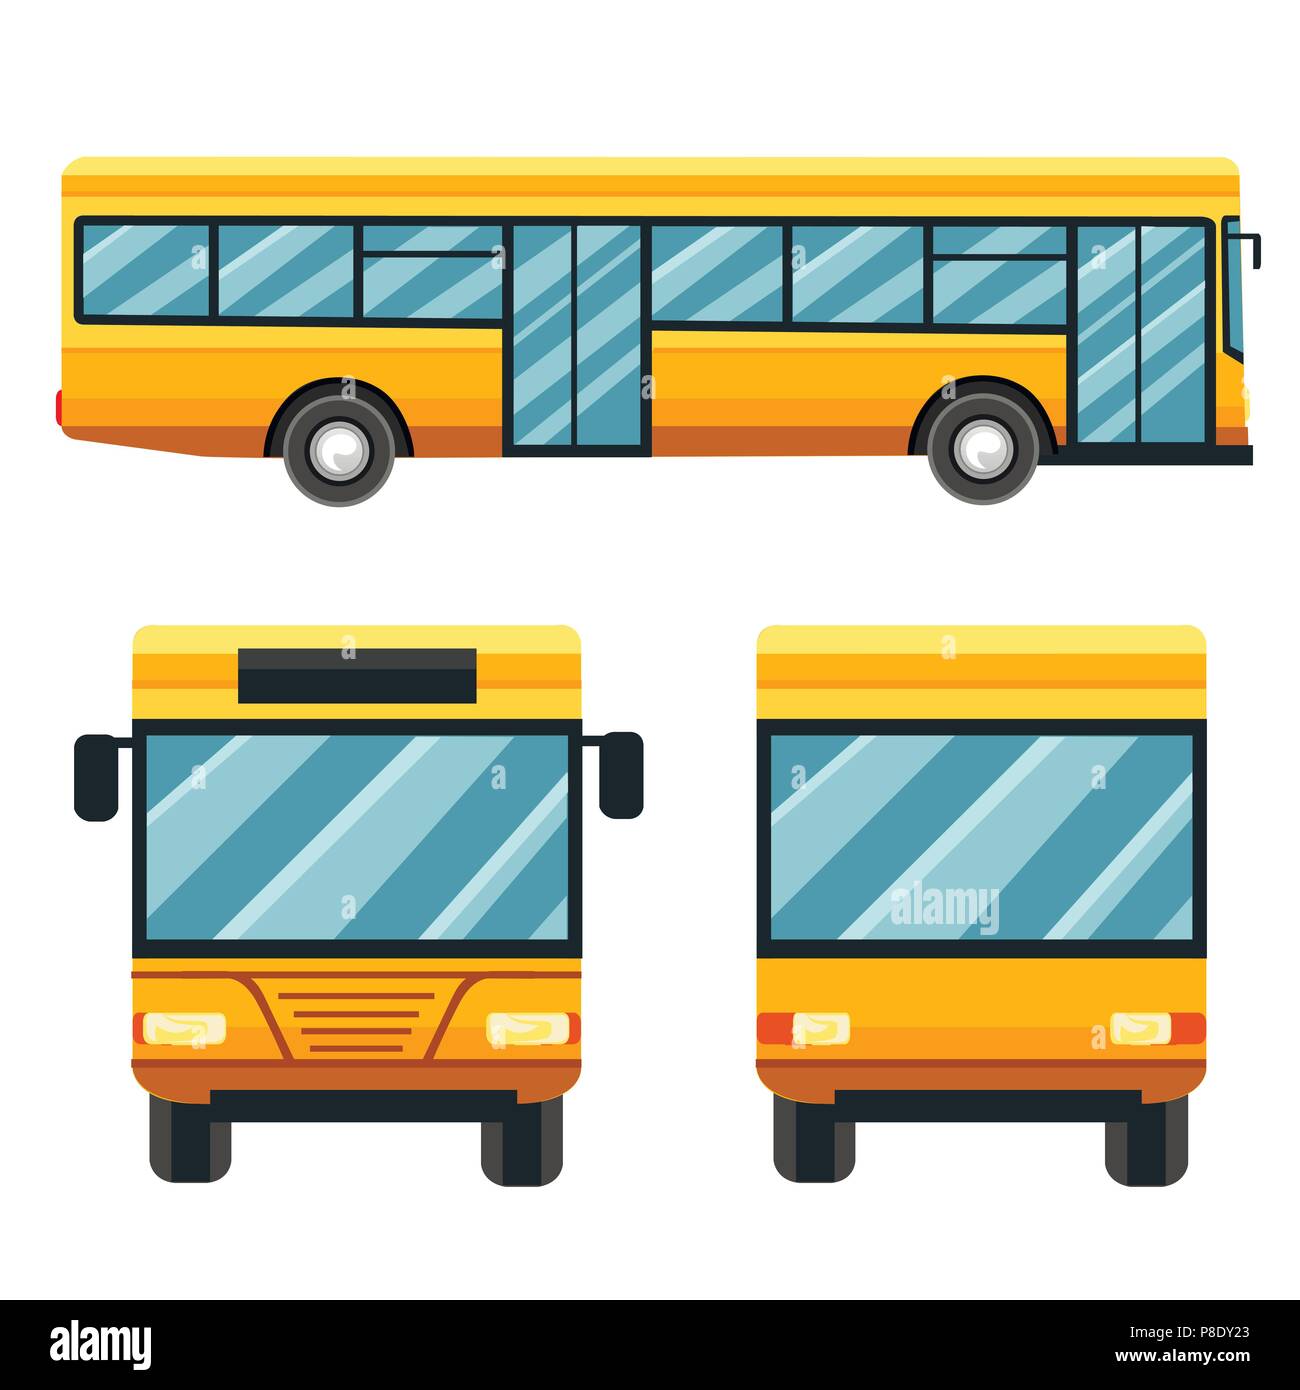 Yellow city bus. Public transport illustration. Flat design style. Isolated on white background. Two front option. Stock Vector